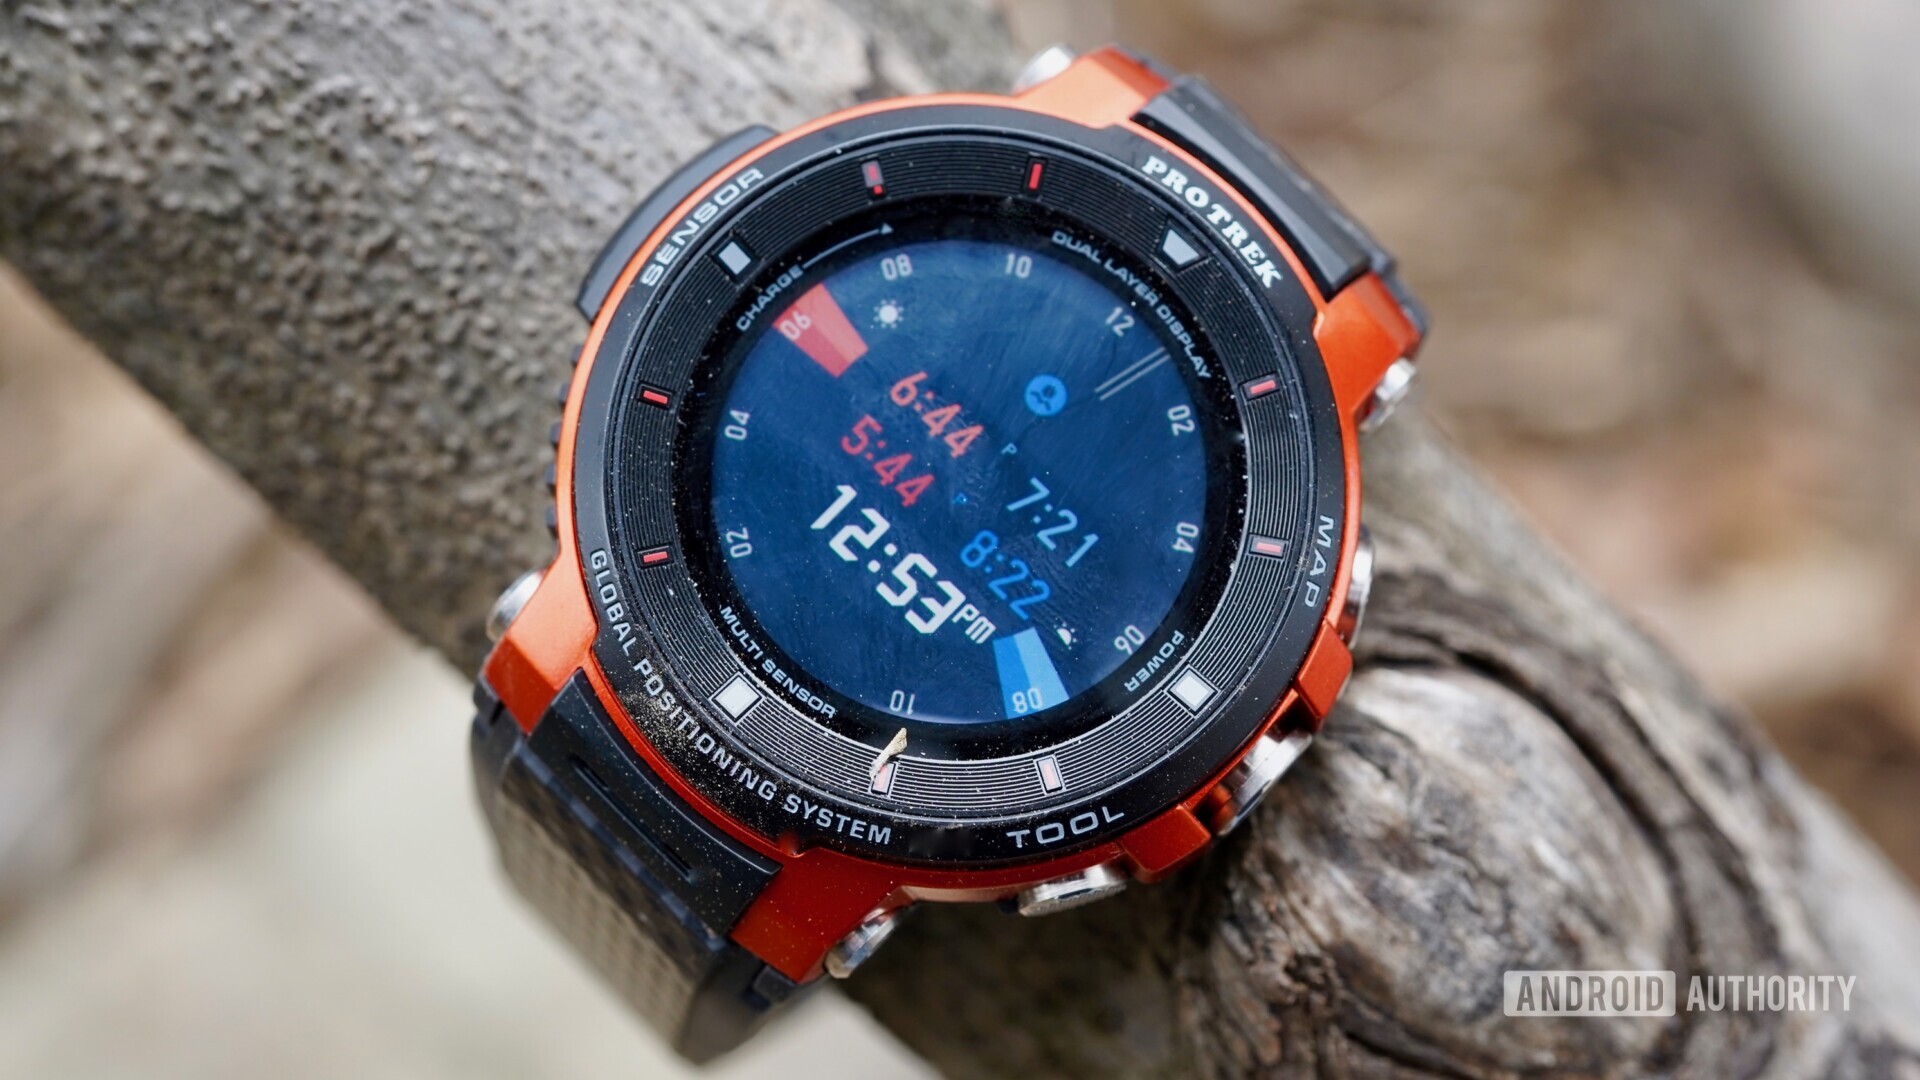 Casio Pro Trek WSD-F30 review: Tracking all your adventures